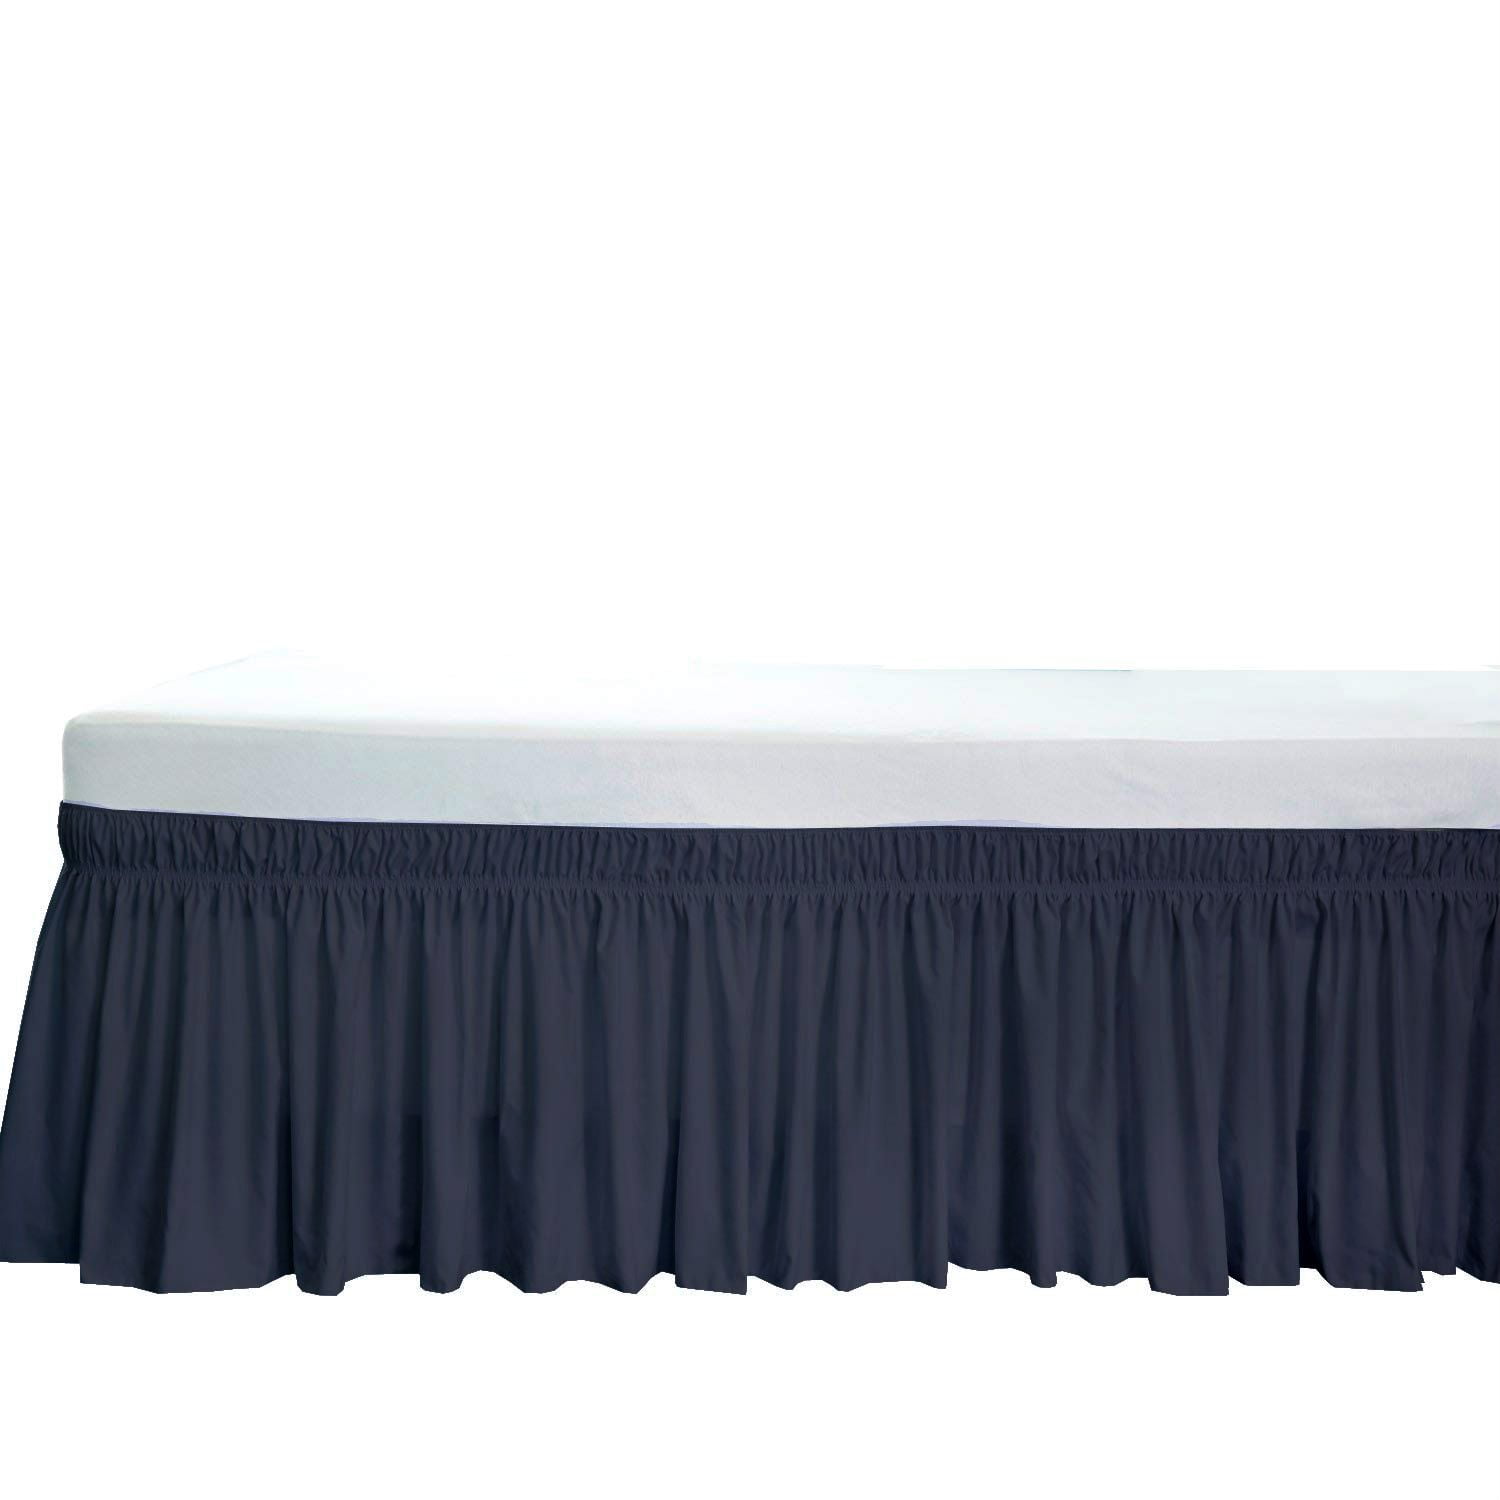 Details about   Wrap Around Bed Skirt Easy Fit Elastic 3 Fabric Sides Cotton Navy Blue Solid 